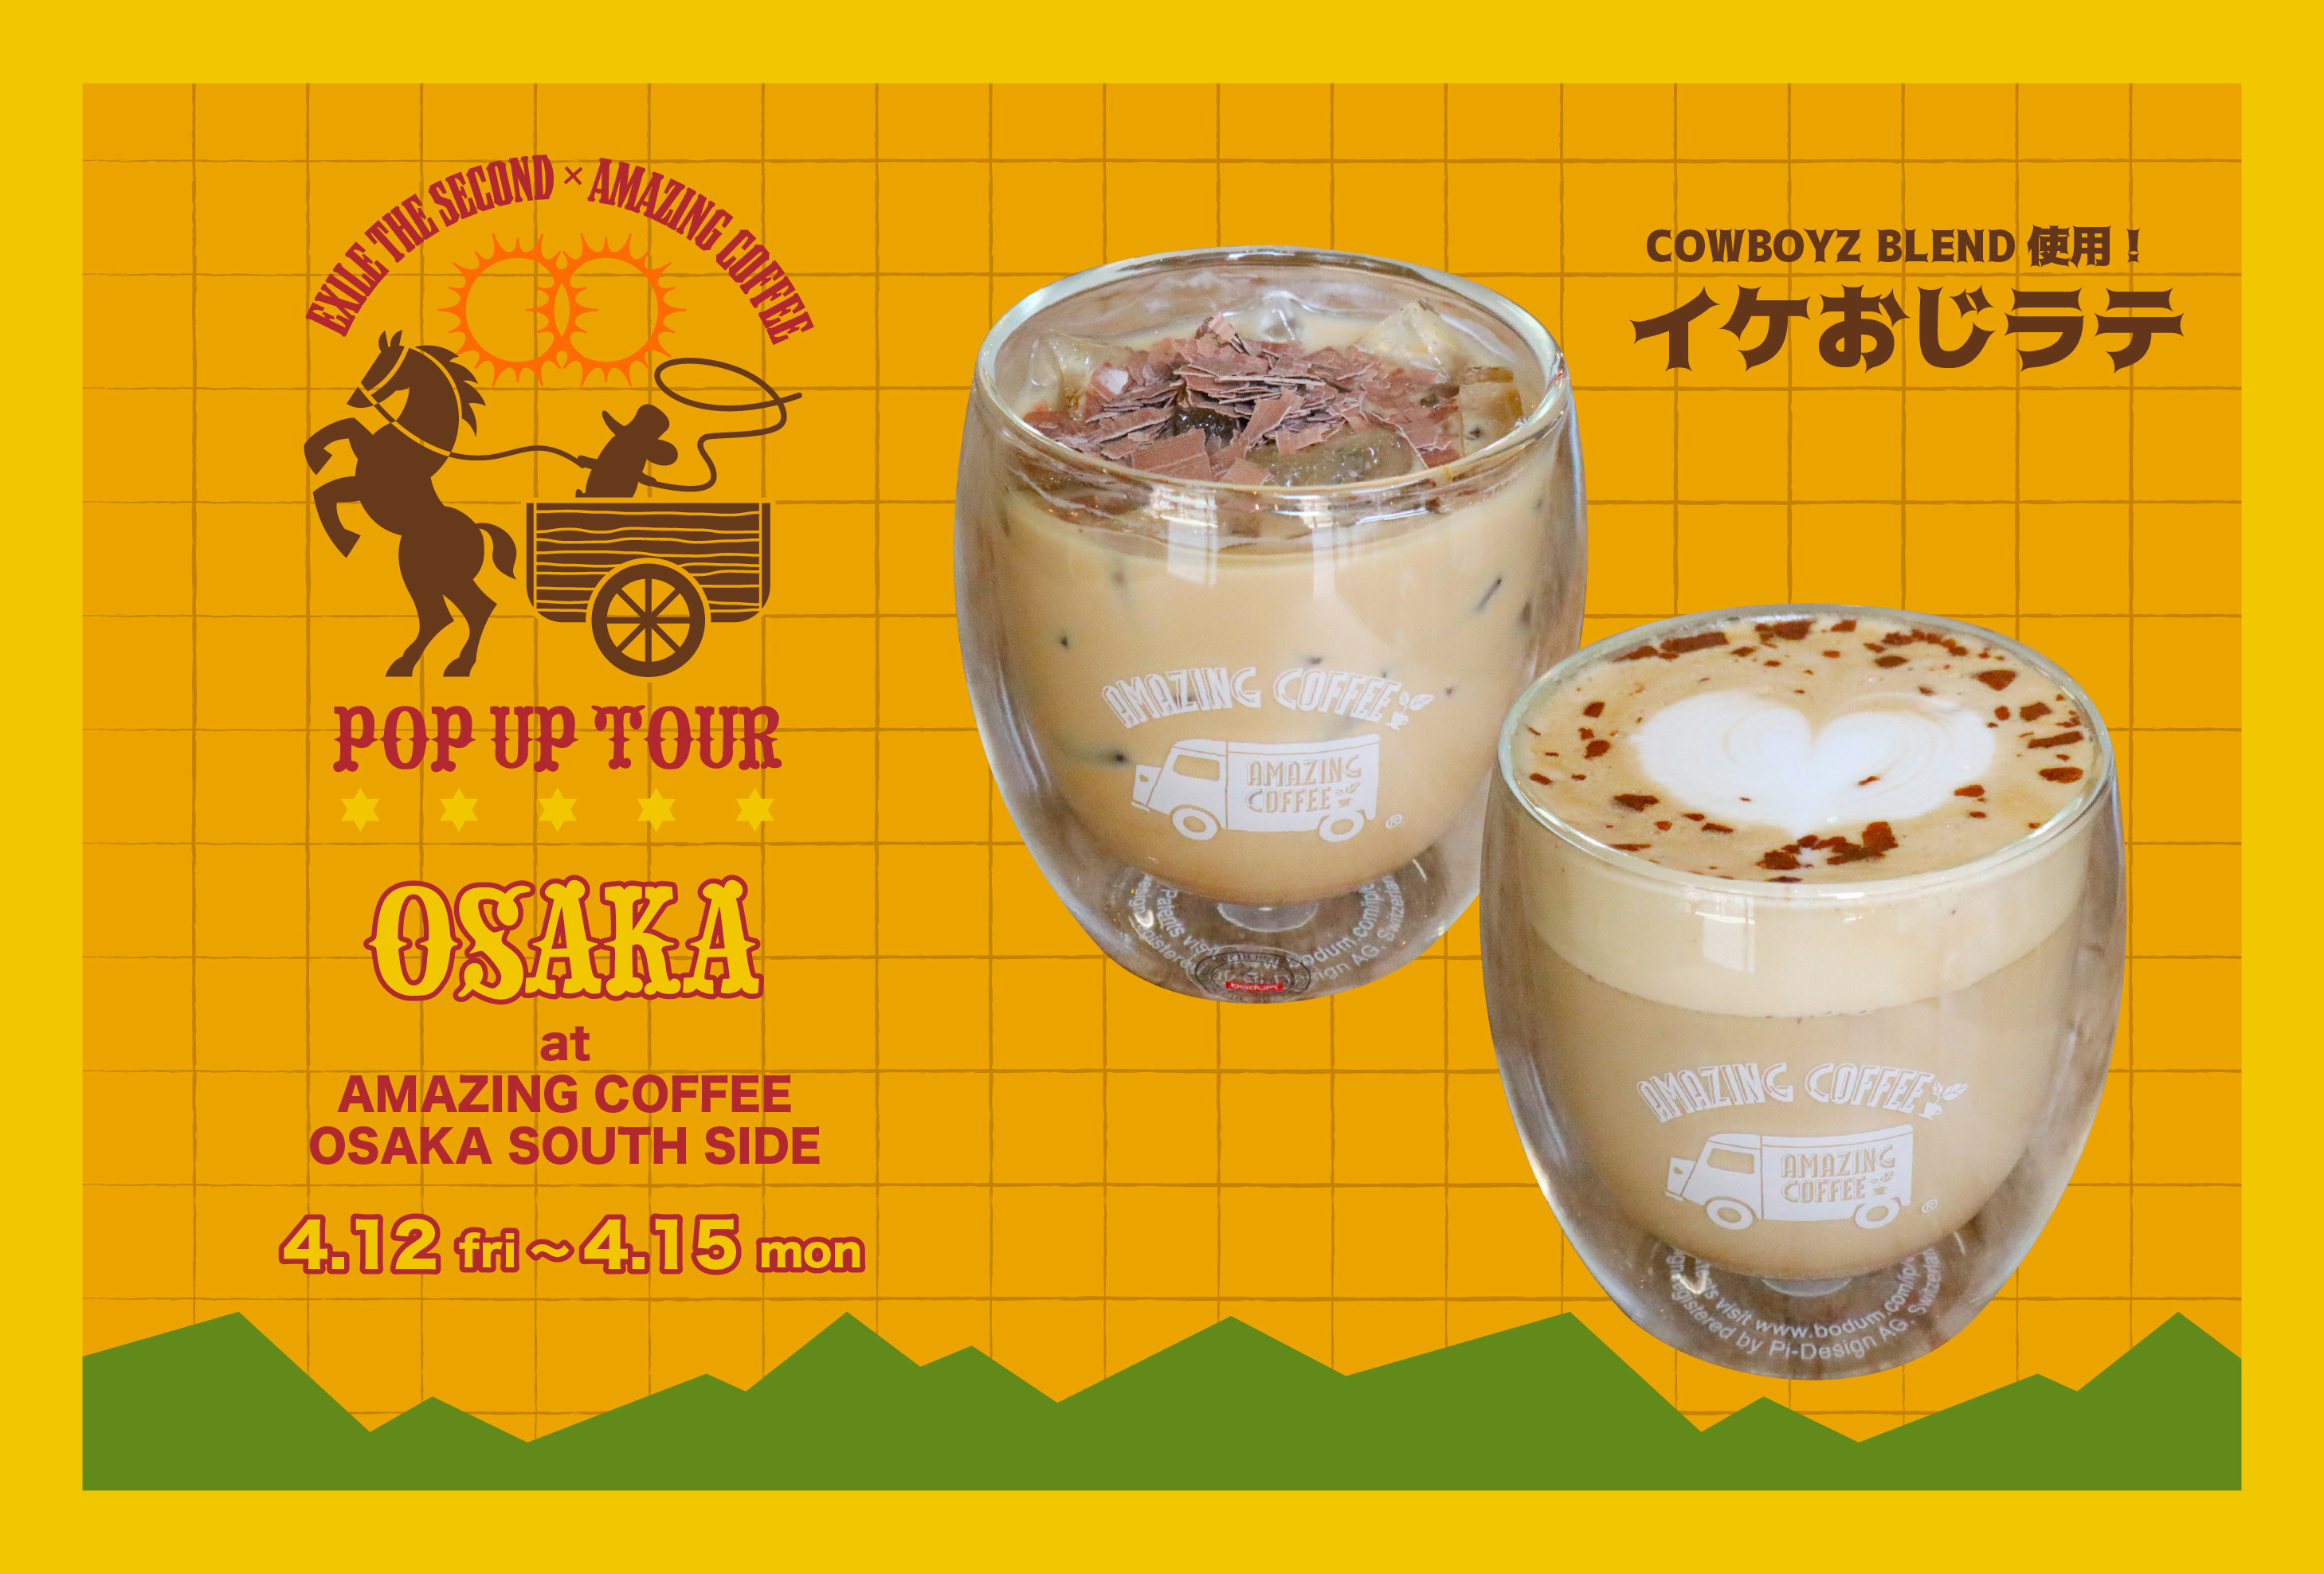 『EXILE THE SECOND × AMAZING COFFEE POP UP TOUR』in 大阪 4月12日(金)〜4月15日(月) AMAZING COFFEE OSAKA SOUTH SIDEにて開催！